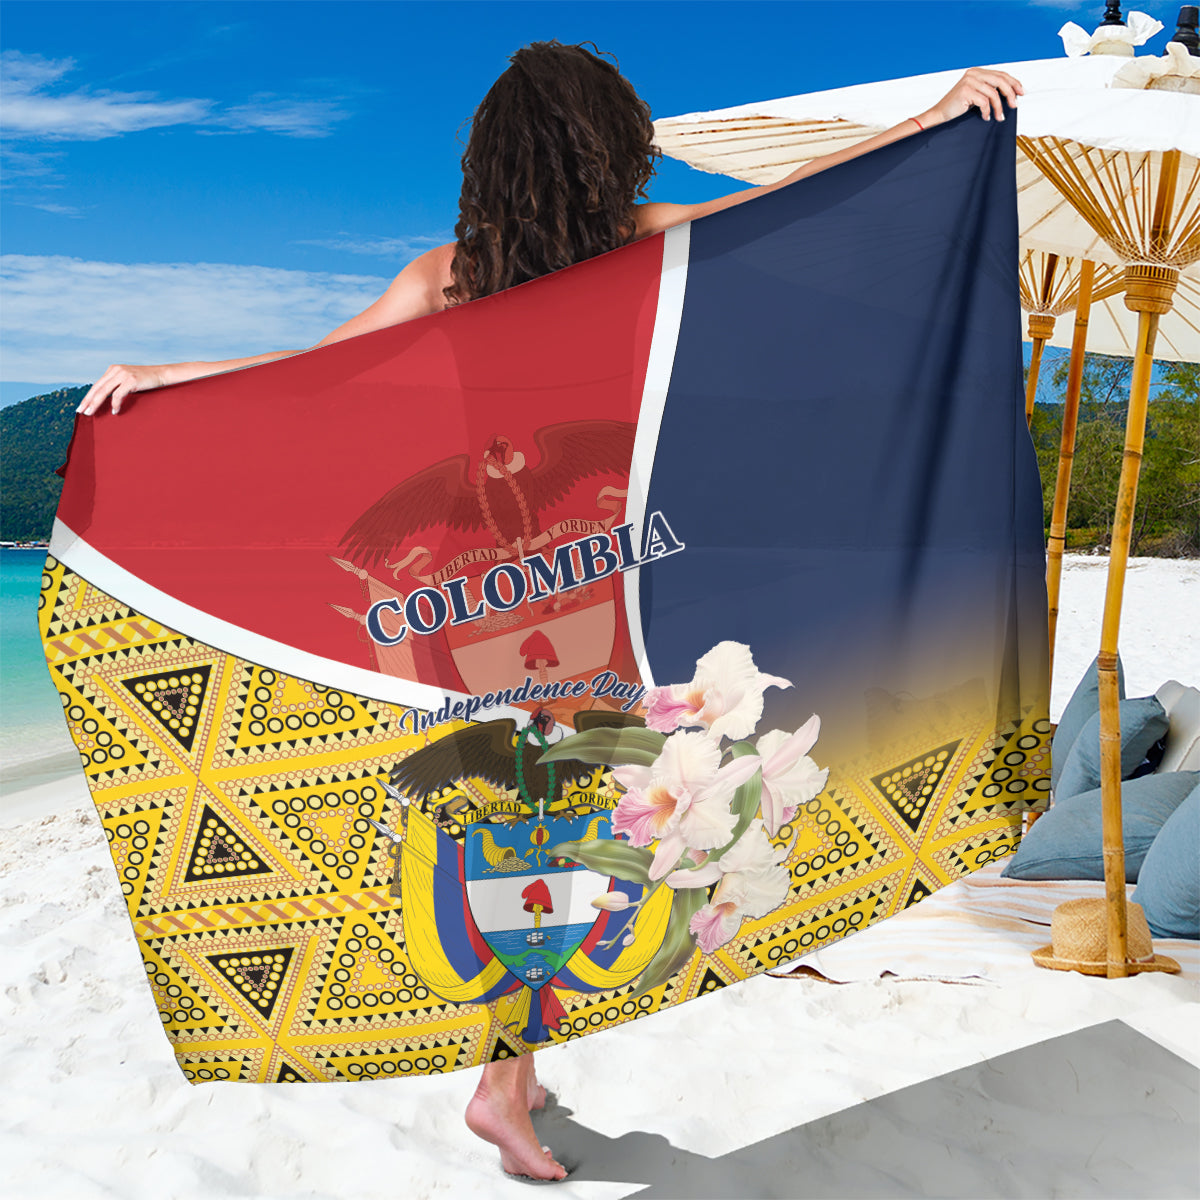 Colombia Independence Day Sarong Libertad y Orden Colombian Pattern